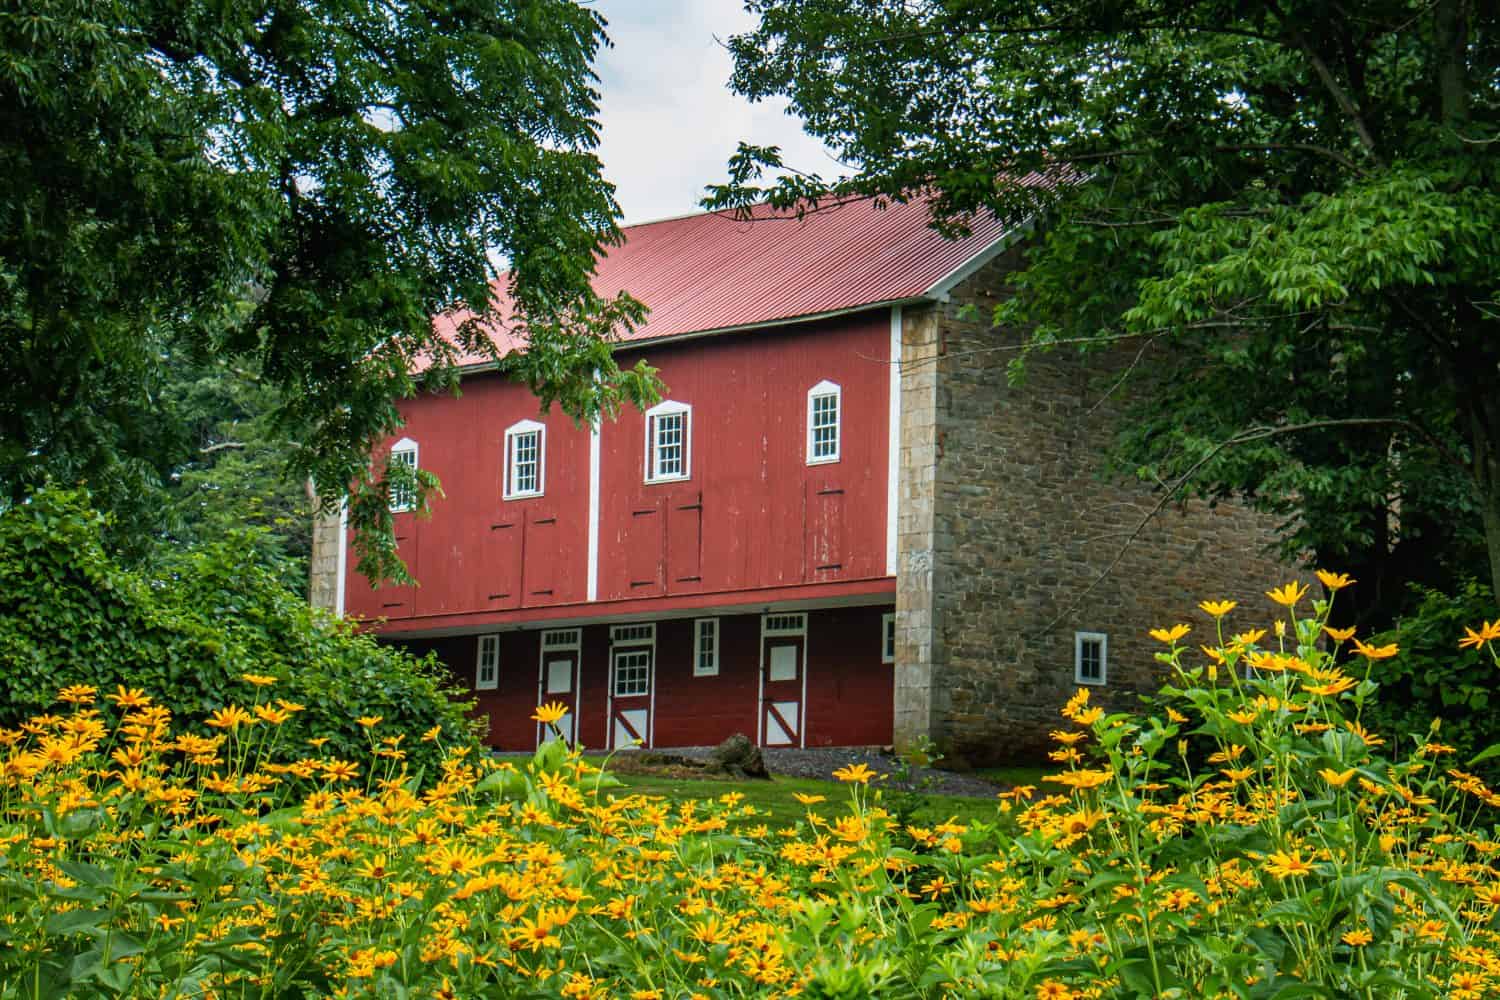 Iconic red barn stands framed by yellow flowers and trees in Wyomissing Park near Reading, PA